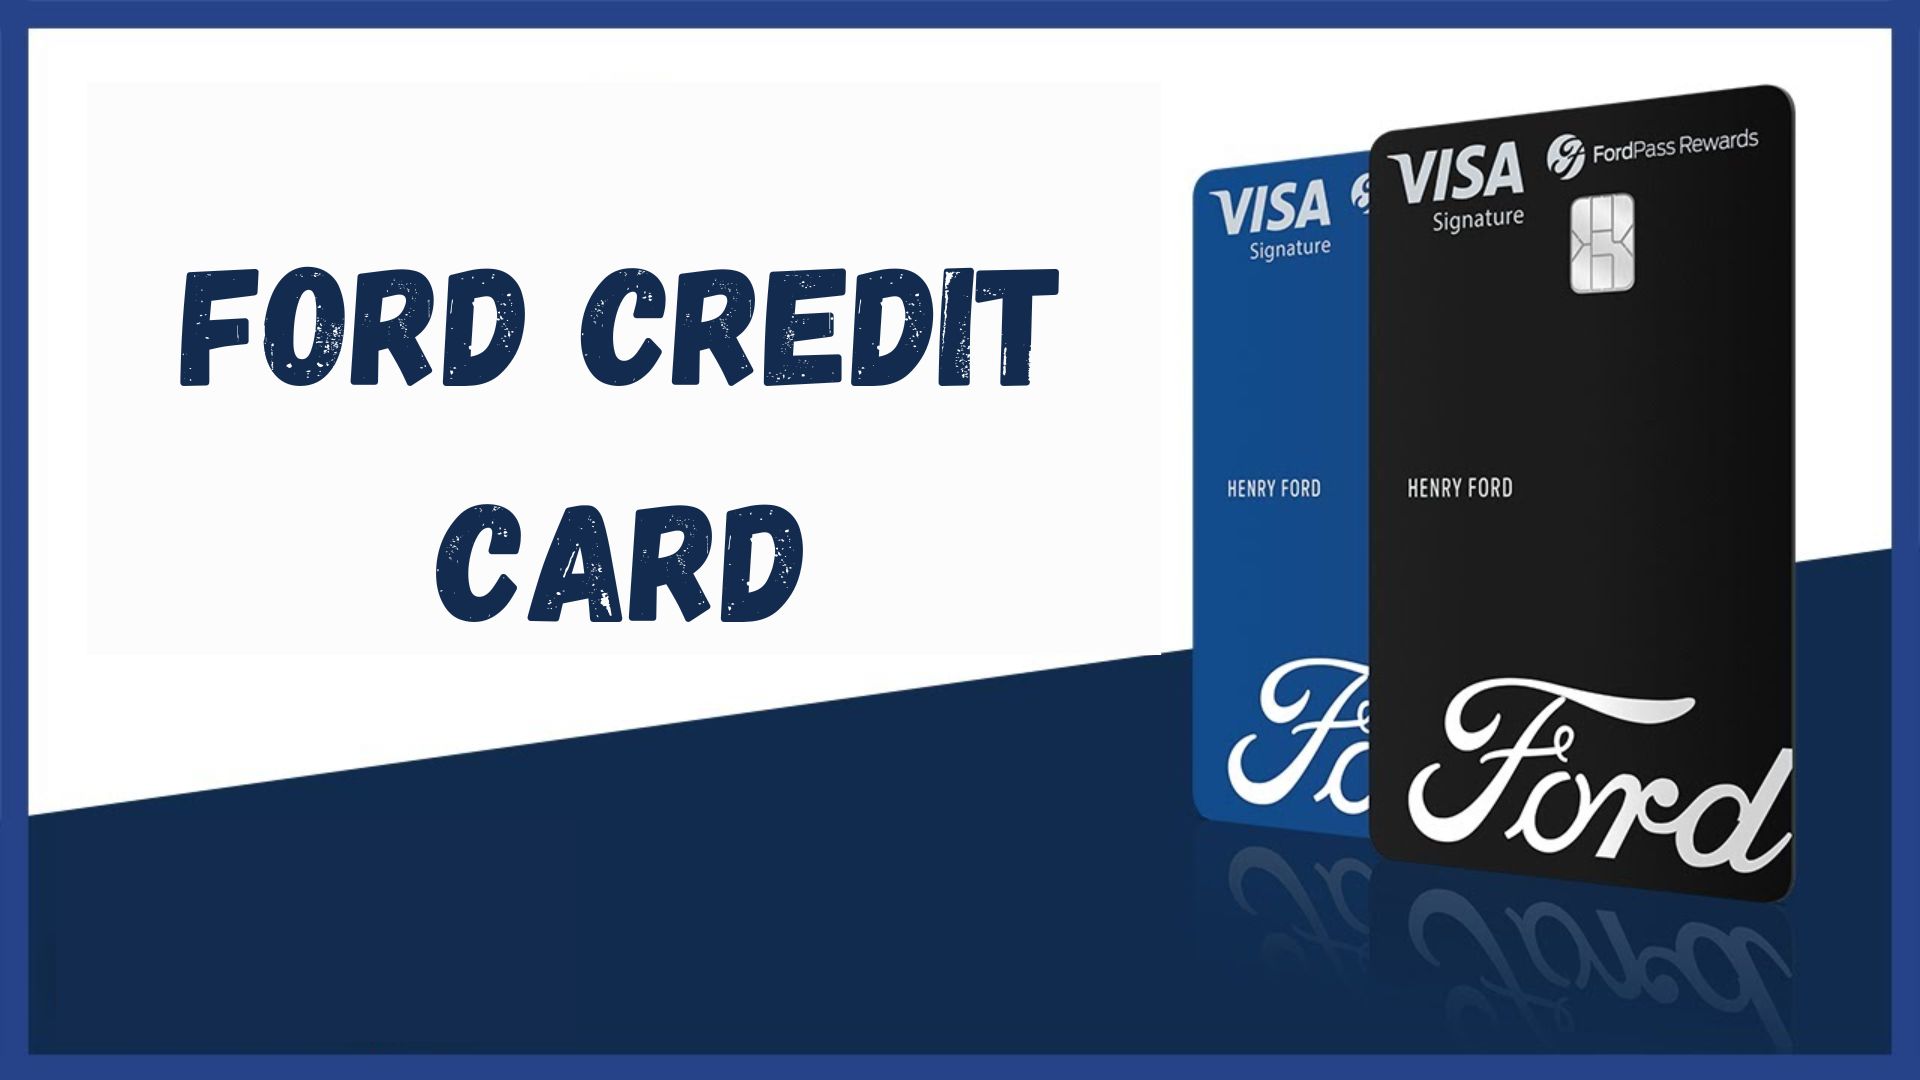 Ford Credit Card